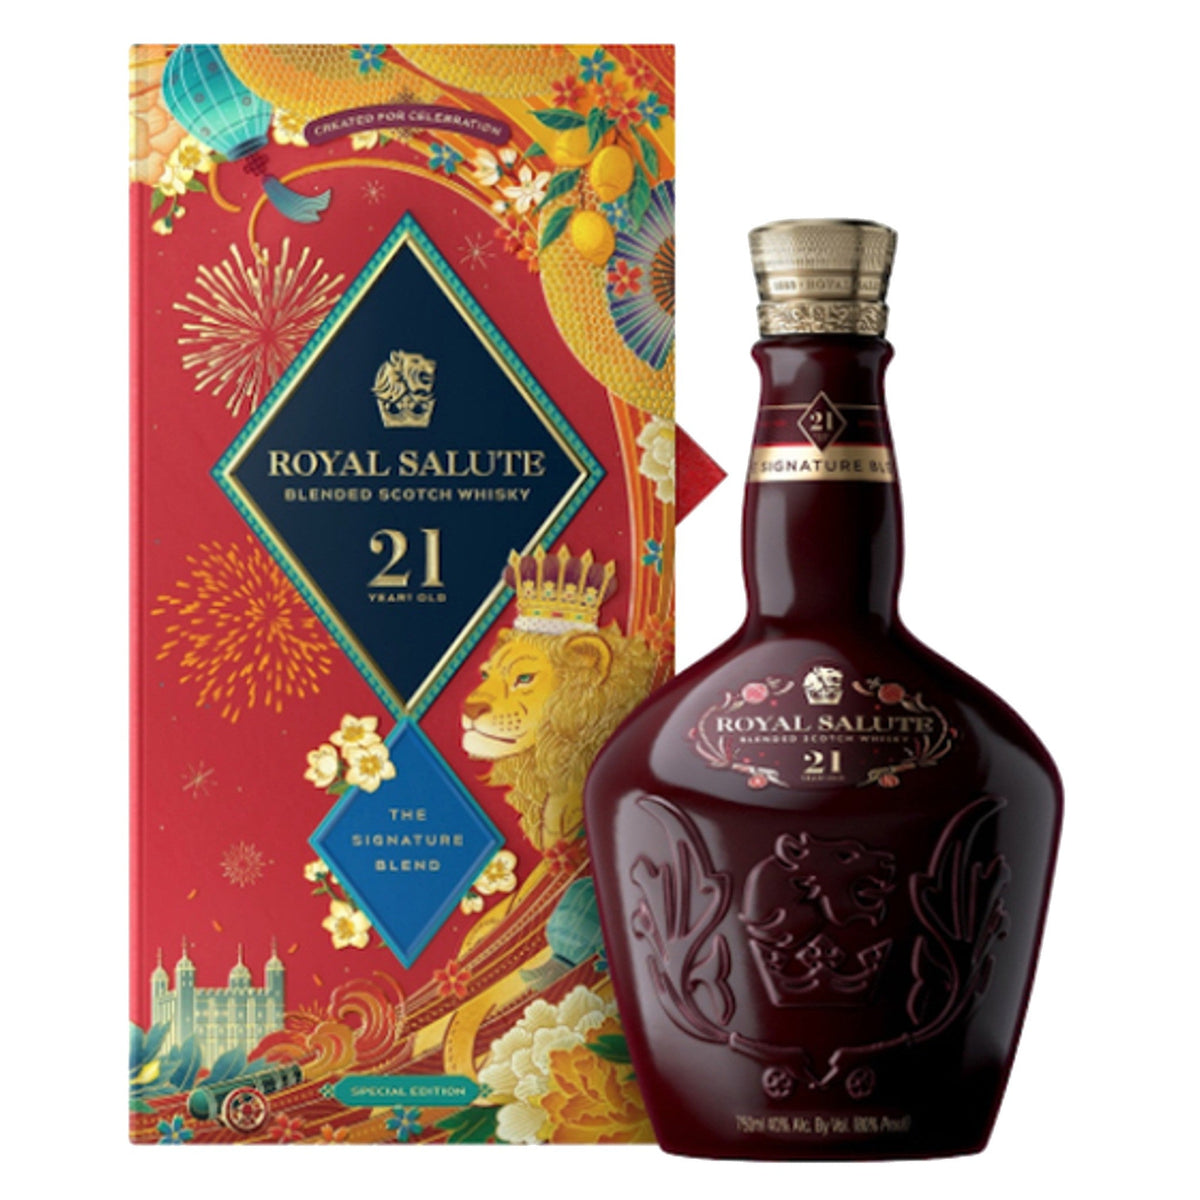 Royal Salute Blended Scotch Whisky - Lunar New Year Special Edition Aged 21 Years (750ml)